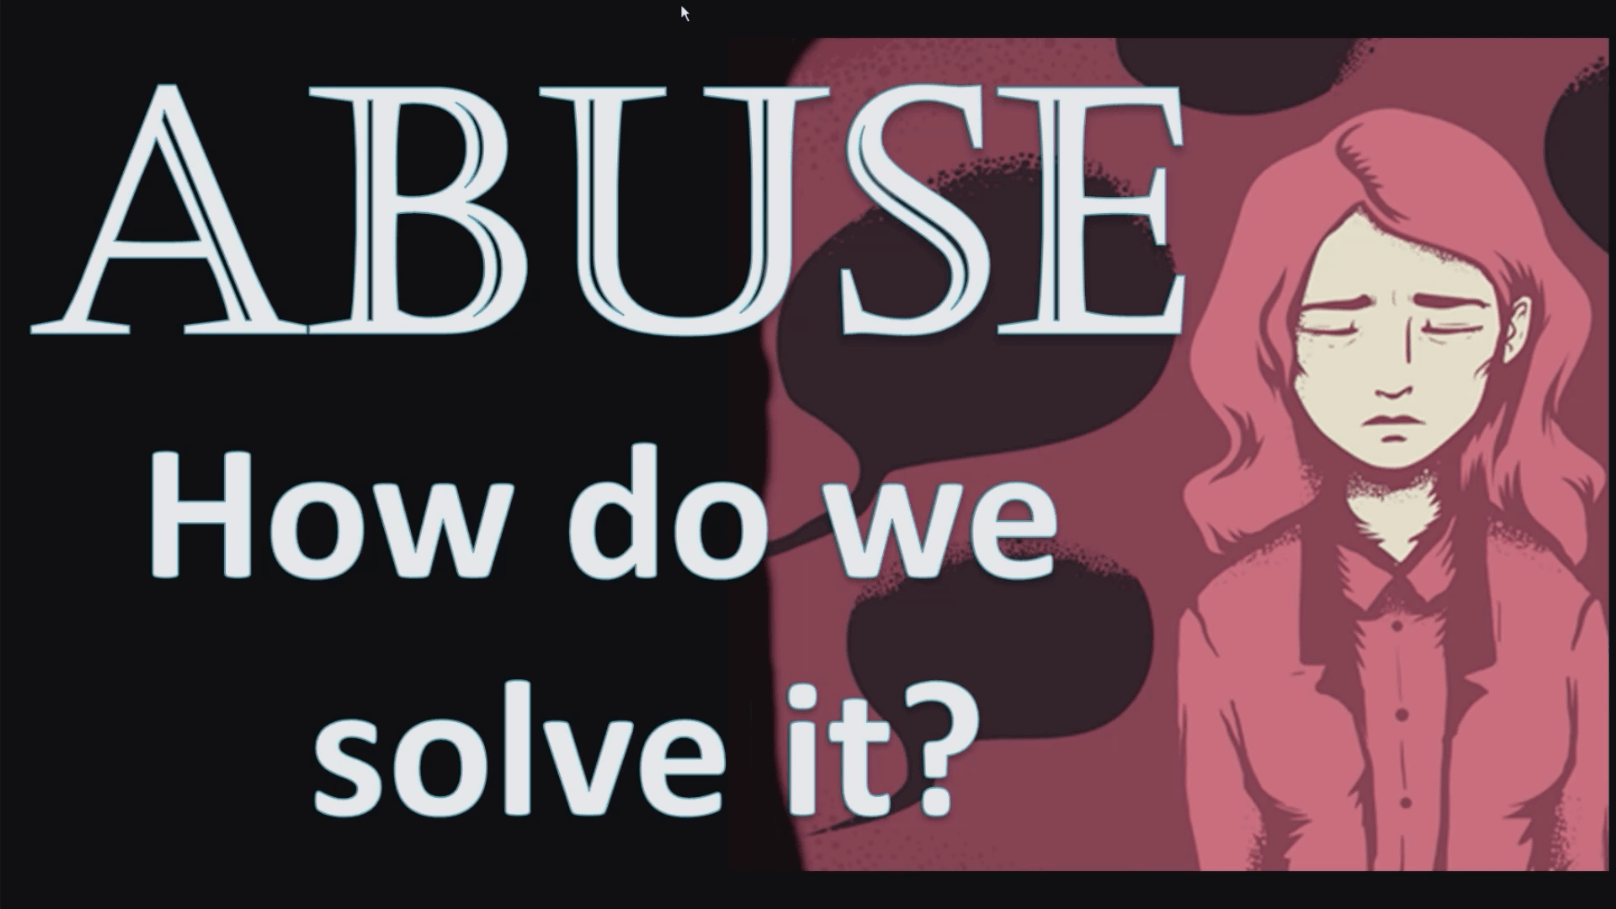 ABUSE: What is it? How do we solve it?